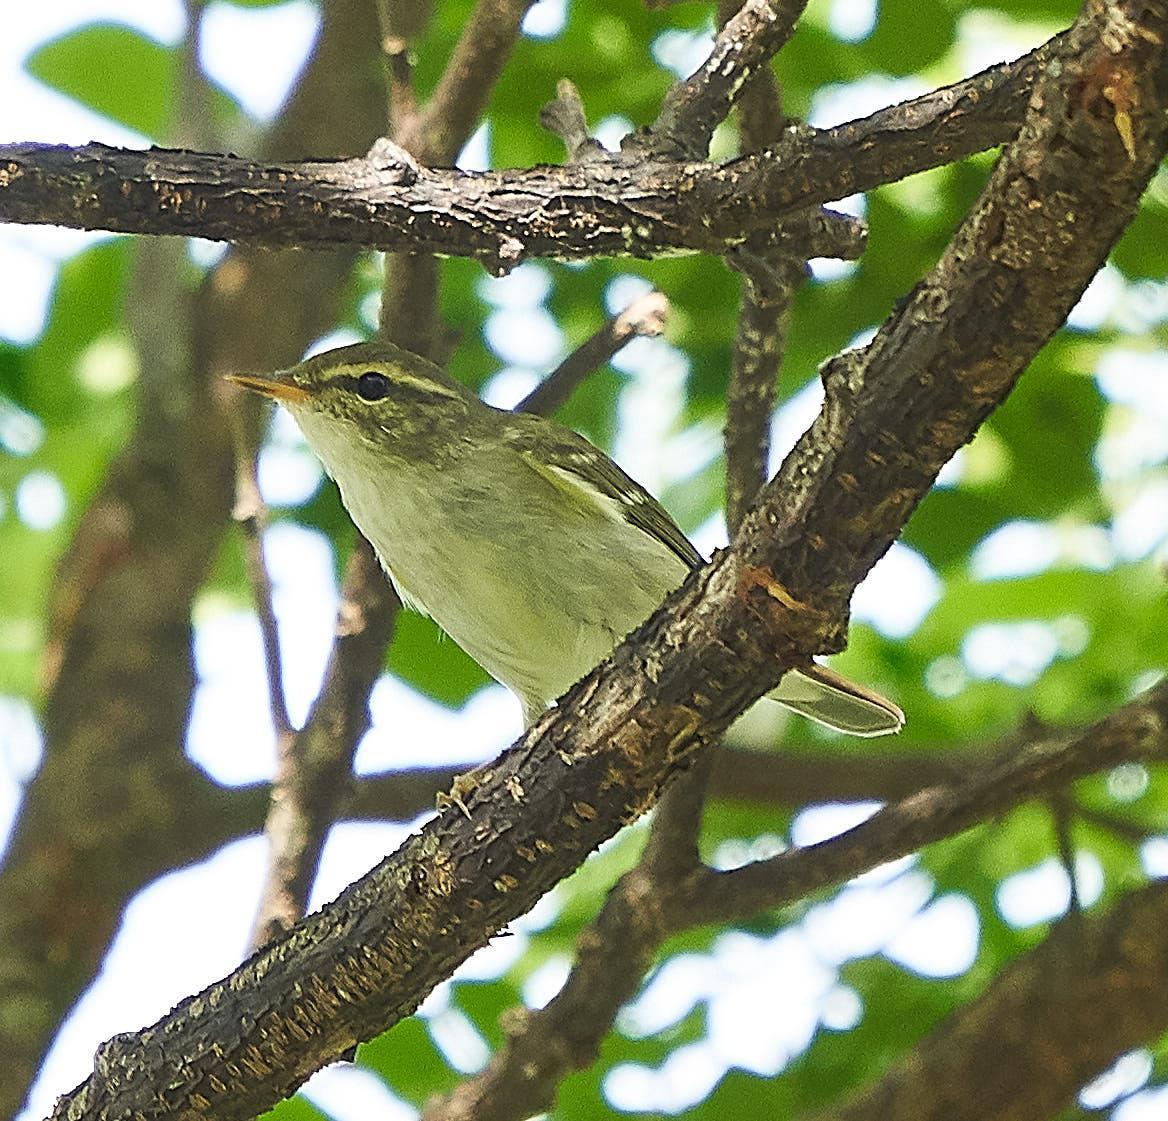 Arctic Warbler Photo by Steven Cheong